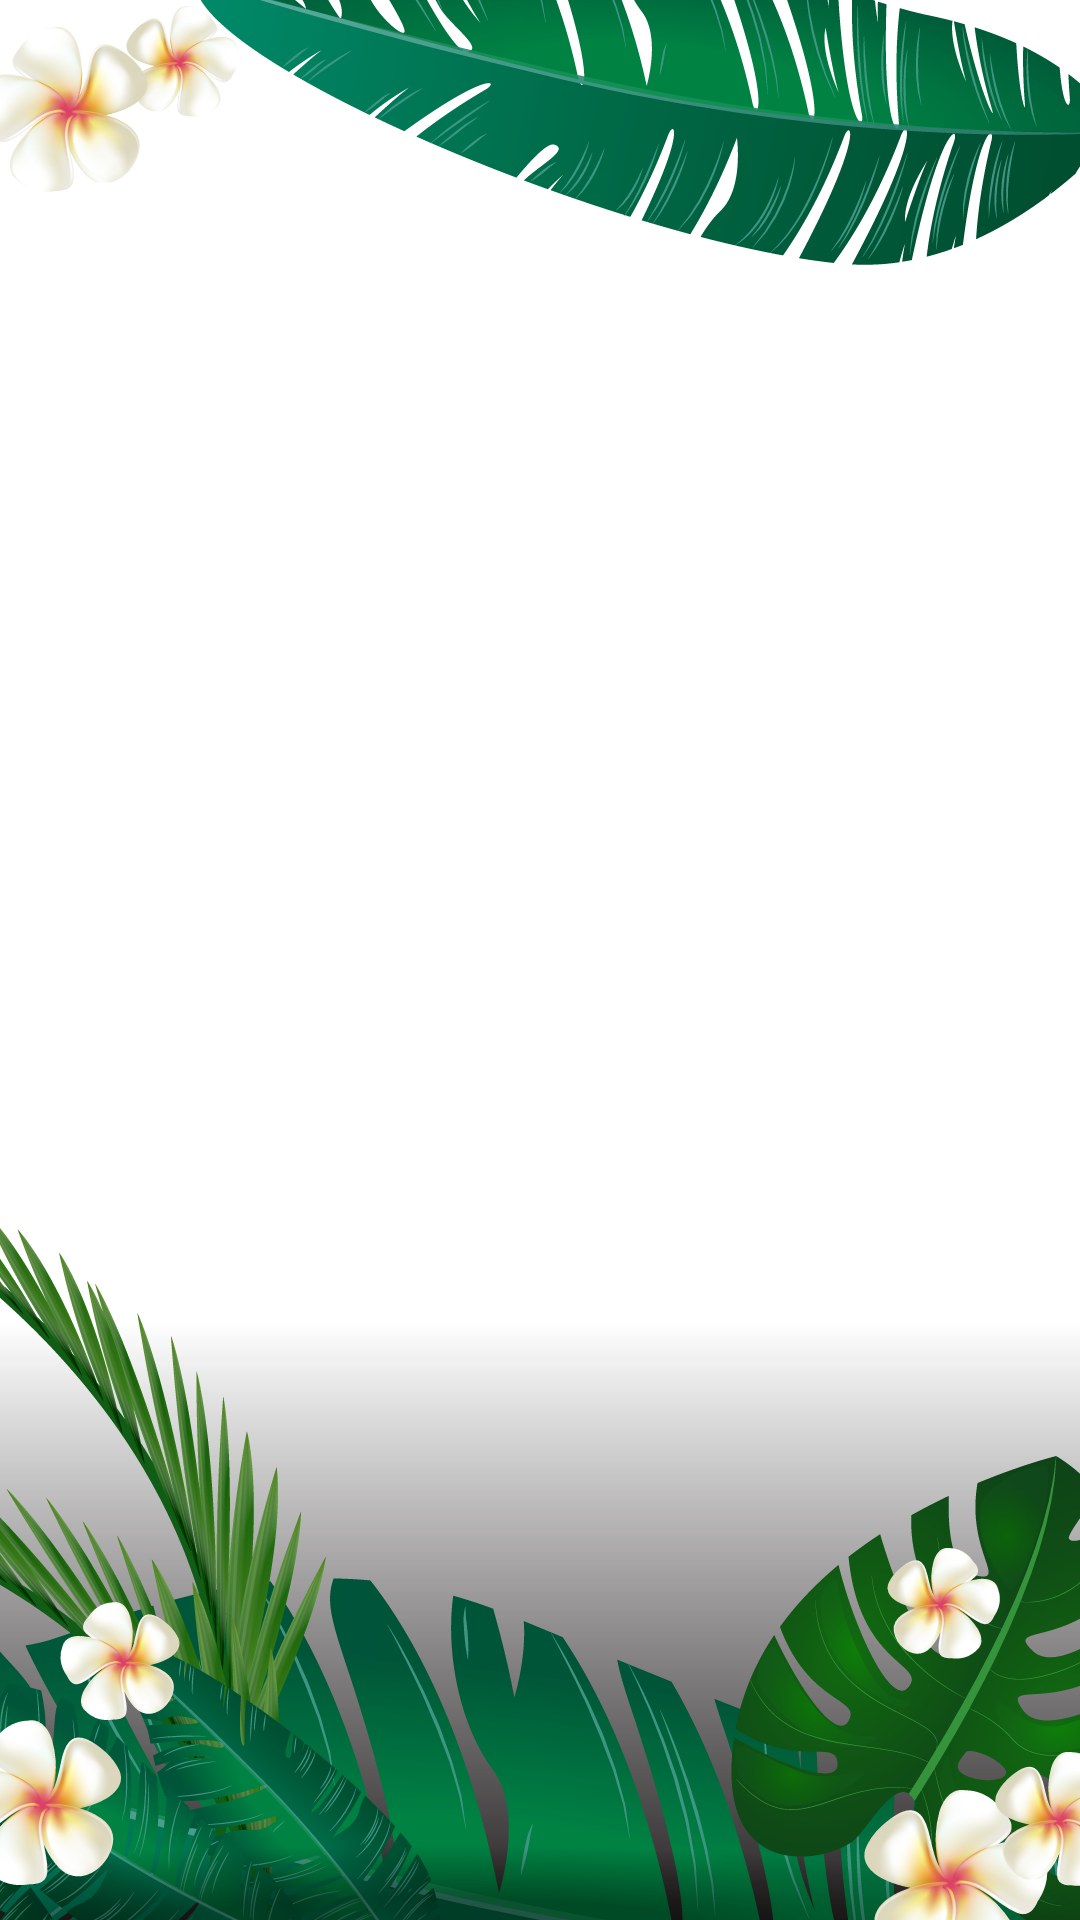 Tropical Leaves Border Design Png Psd Files Png Images Clipart Images